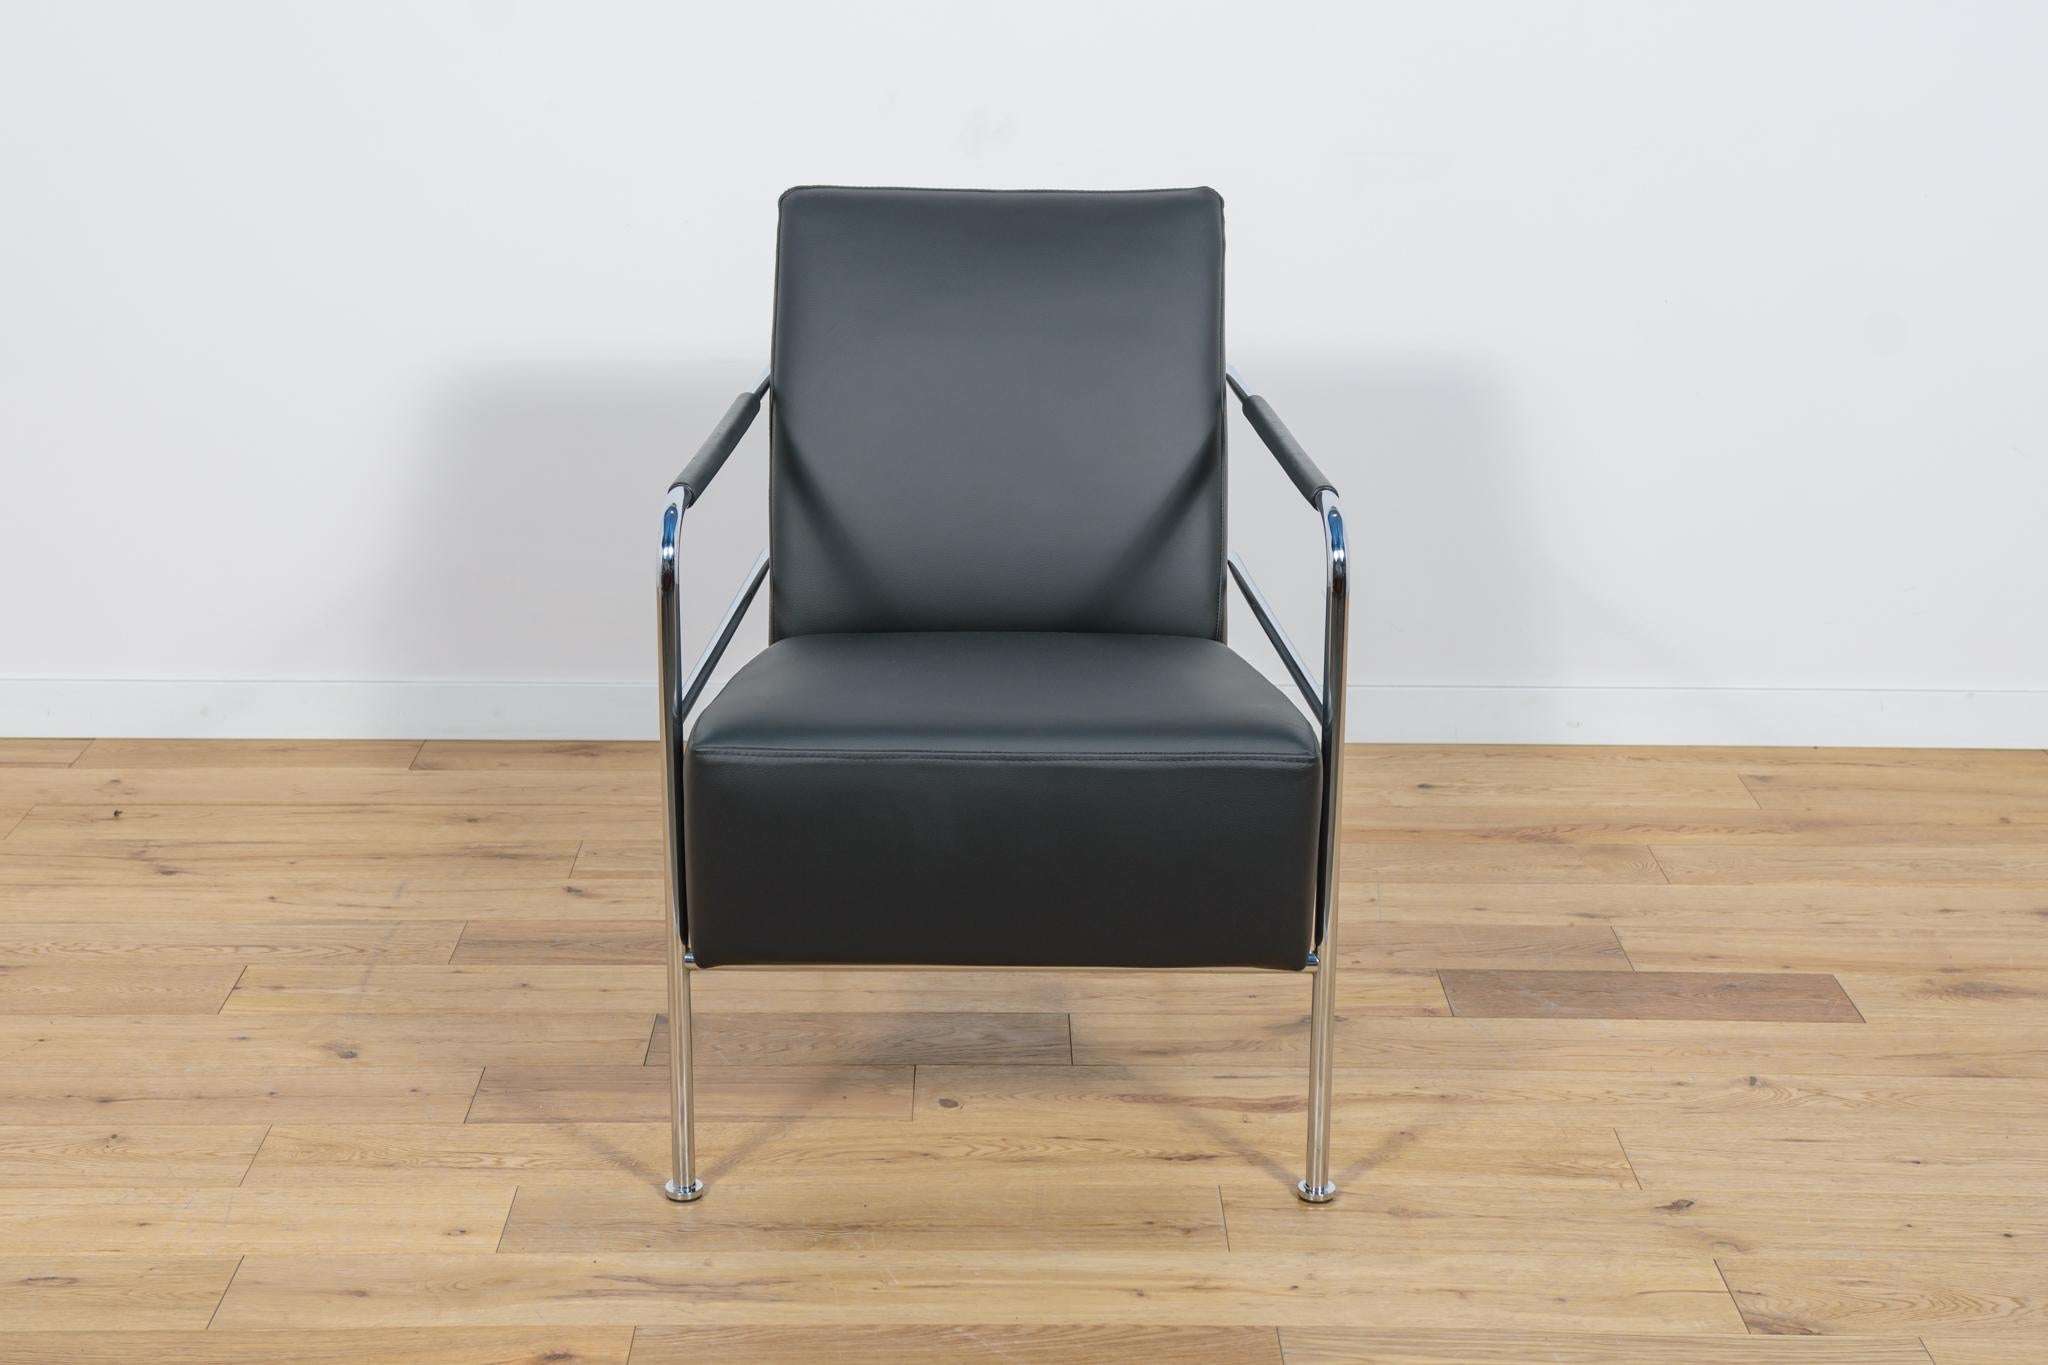 The Cinema Armchair designed by Gunilla Allard for the Swedish manufacturer Lammhults in 1994. Gunilla Allard was inspired by old sports cars, which inspired her to create the details of the collection - chrome, stitching and high-quality genuine